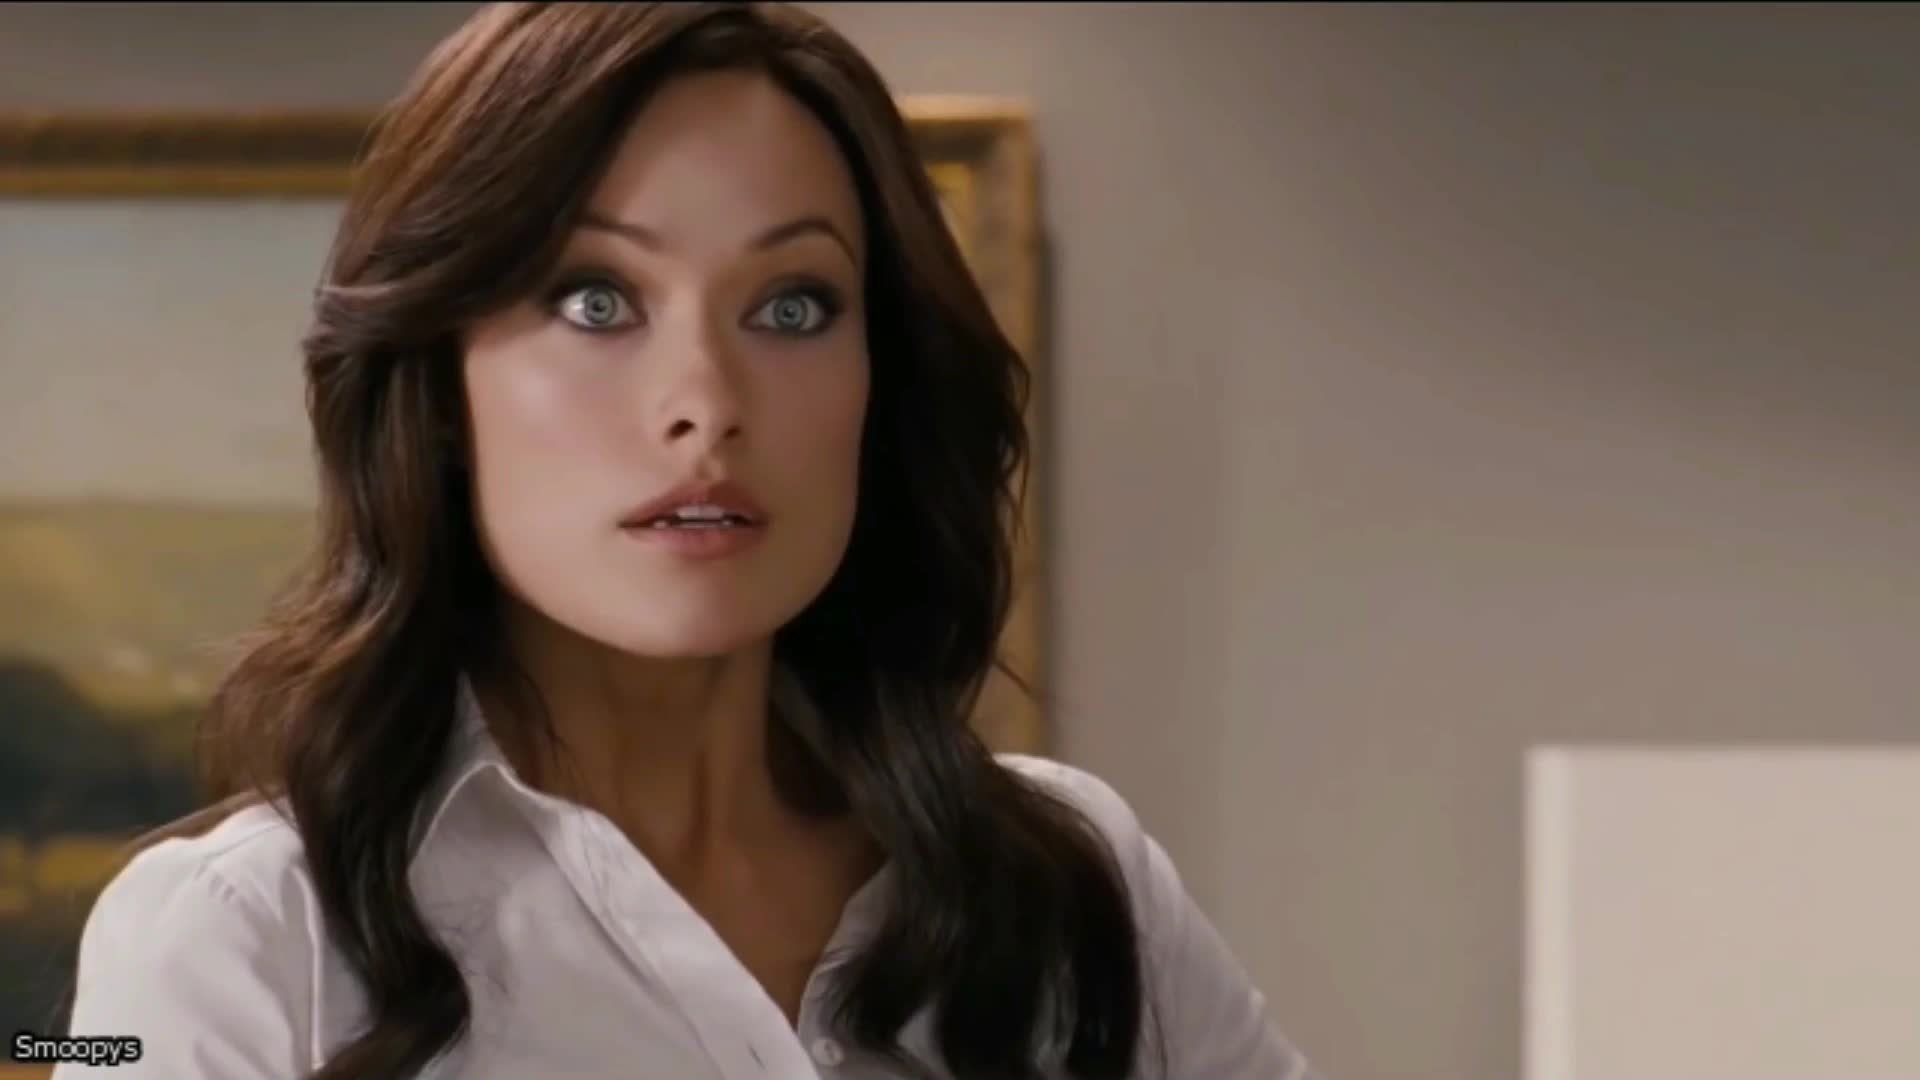 Sexy Just Seen Olivia Wilde In A Film She Gets Nowhere Near Enough Attention On Here She D Be